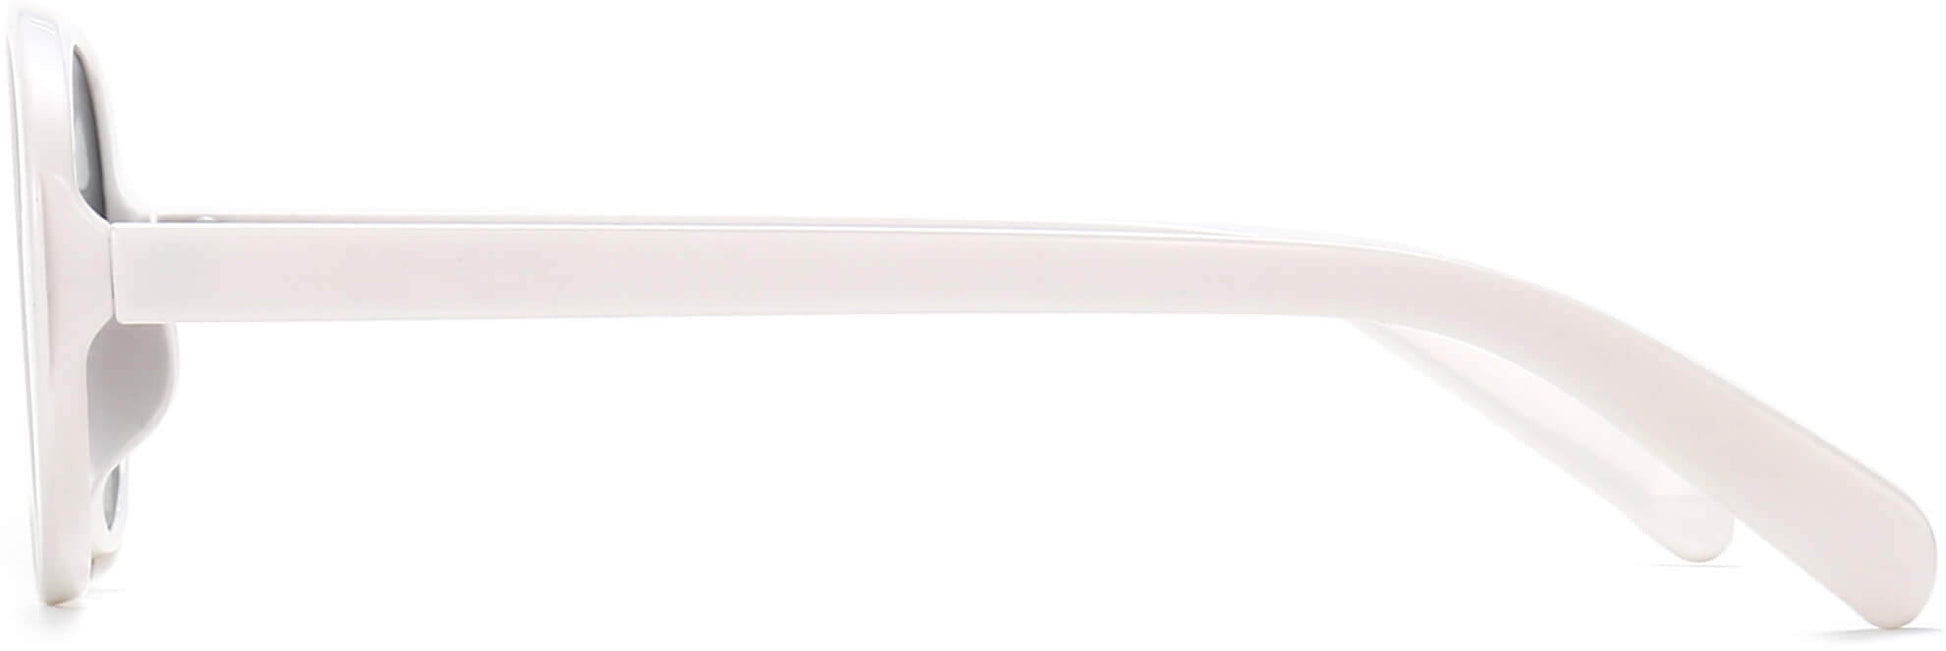 Emery White Plastic Sunglasses from ANRRI, side view